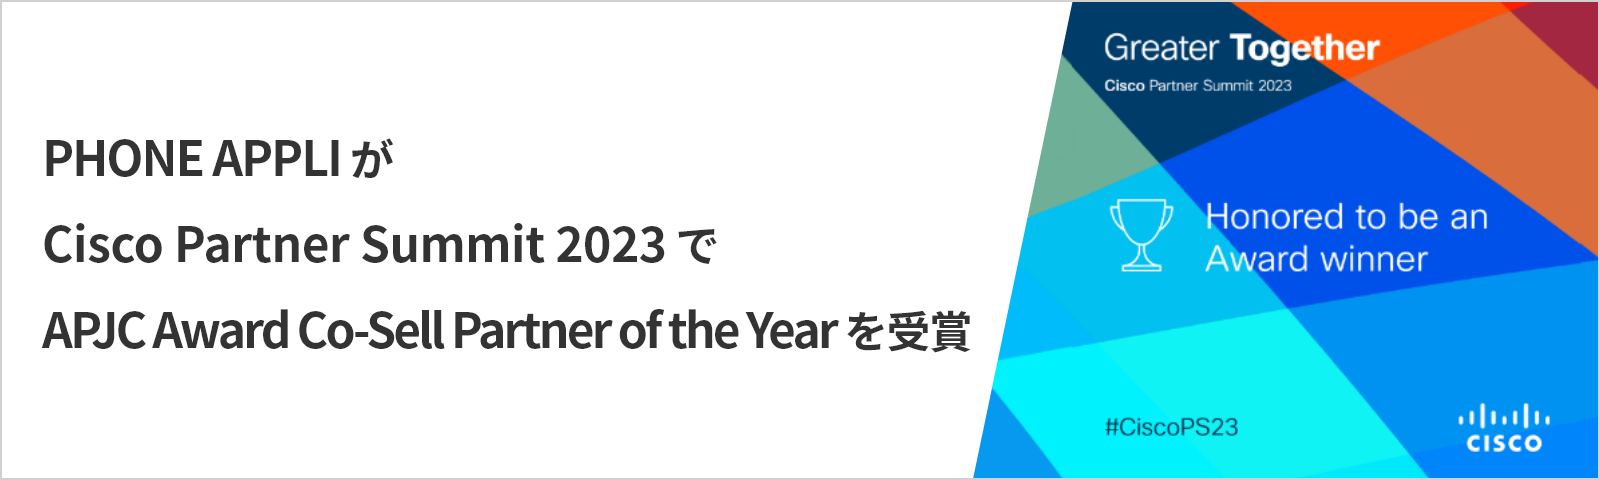 PHONE APPLIがCisco Partner Summit 2023でAPJC Award Co-Sell Partner of the Yearを受賞